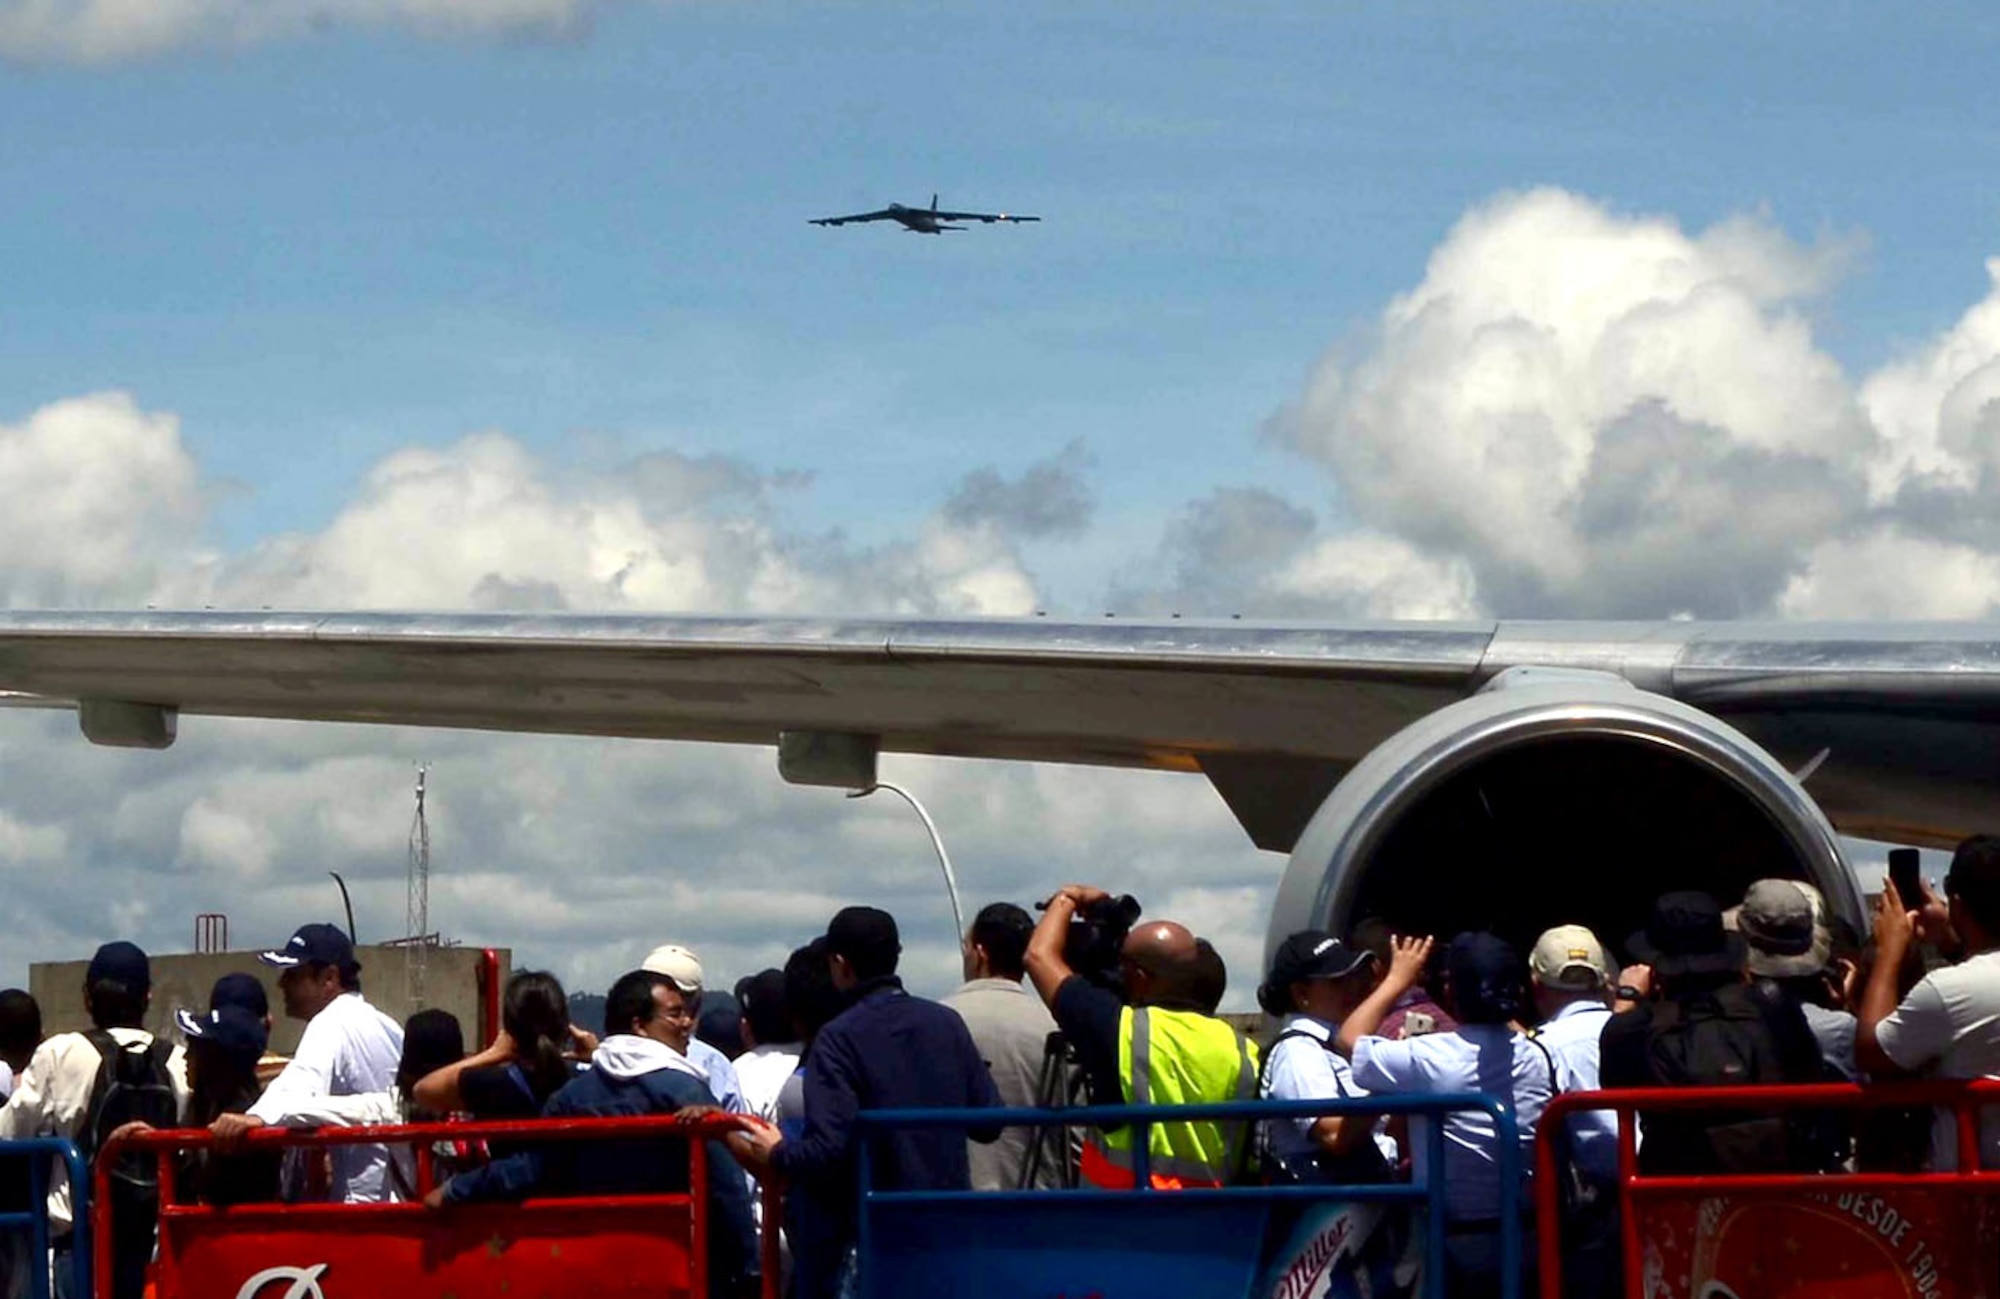 A crowd watches the arrival of a U.S. Air Force B-52 Stratofortress at the Jose Maria Cordova International Airport during a flyover demonstration at the Colombian International Air Festival, July 9, 2015 in Rionegro, Colombia. The aircraft took off from its home station at Minot Air Force Base, N.D., to conduct a 16-hour, long-range training mission which included the flyover in Colombia. The B-52 Stratofortress is a long-range strategic aircraft capable of traveling 8,800 miles before refueling. (U.S. Air Force photo by MSgt. Kristina Newton/Released)